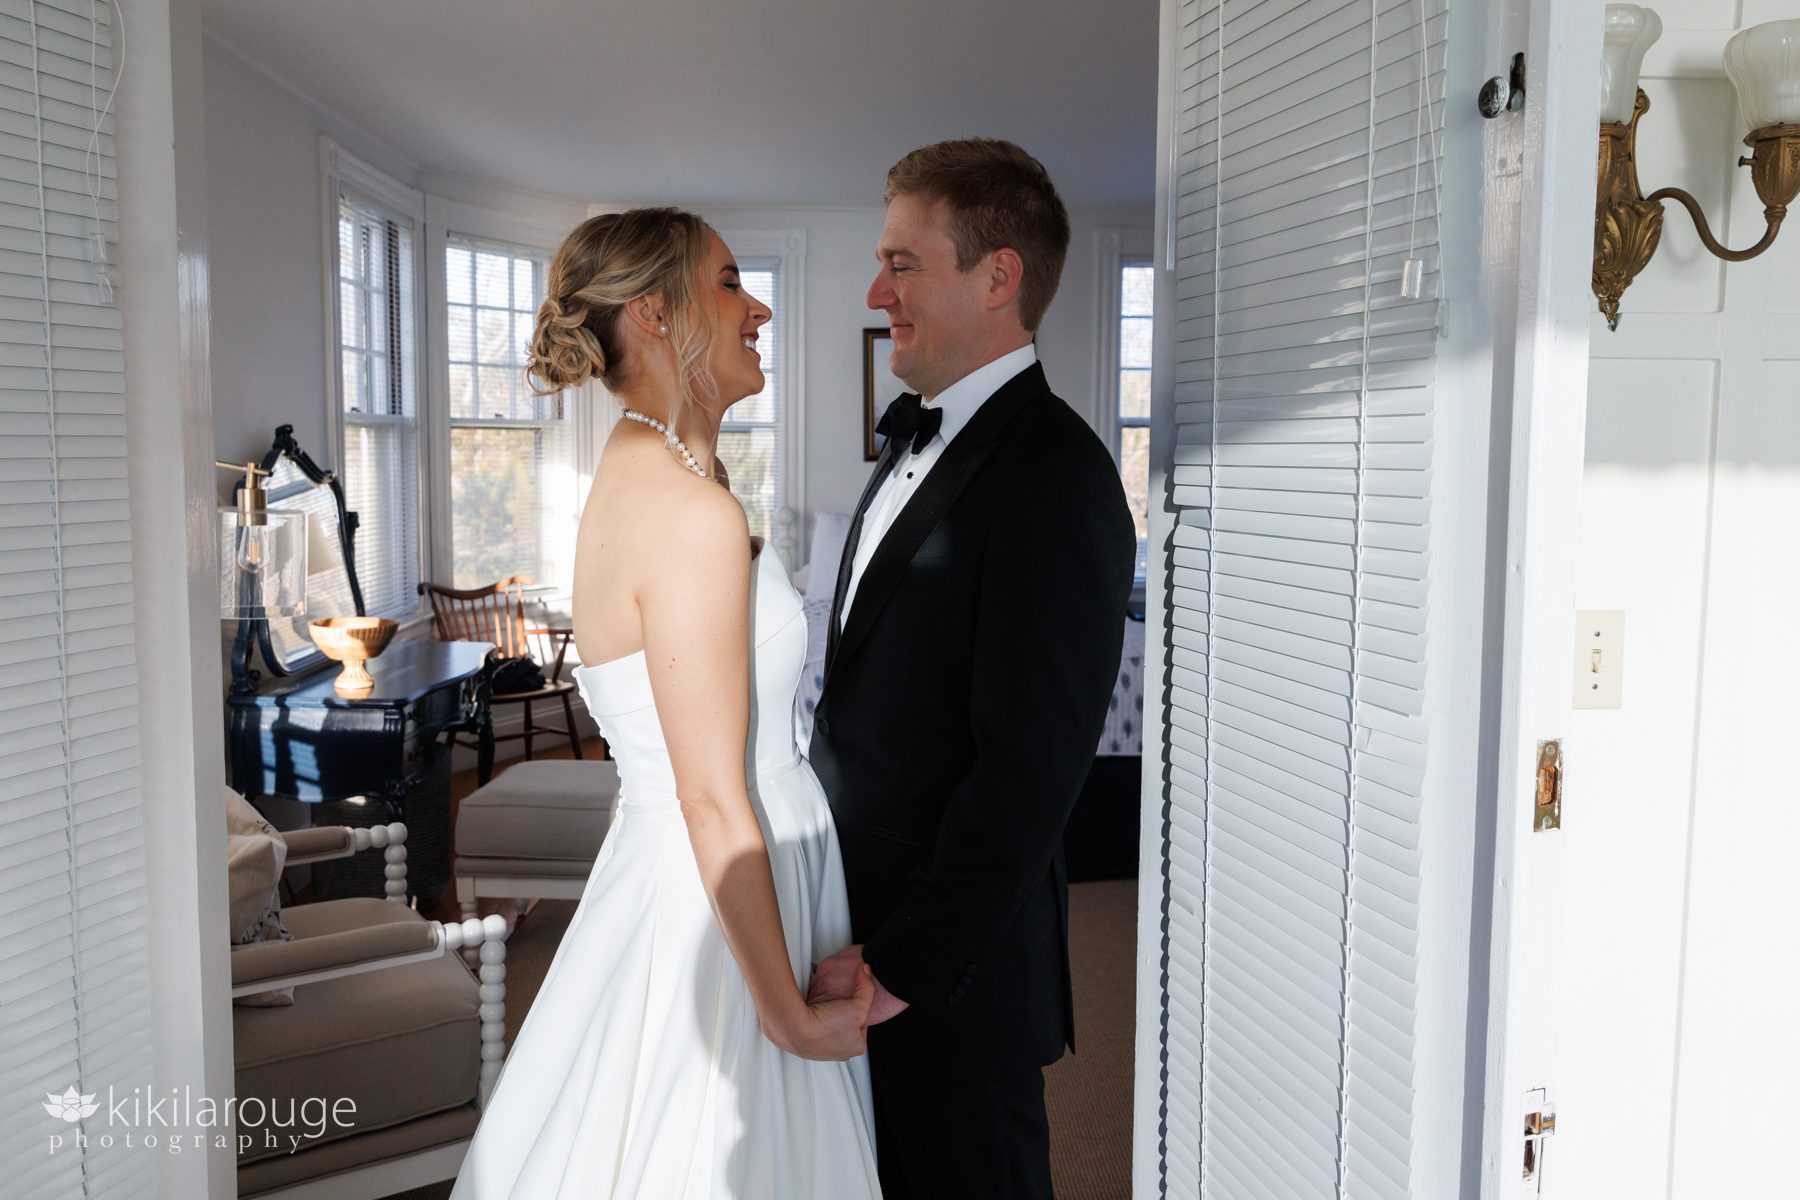 Wedding couple facing each other in bridal suite